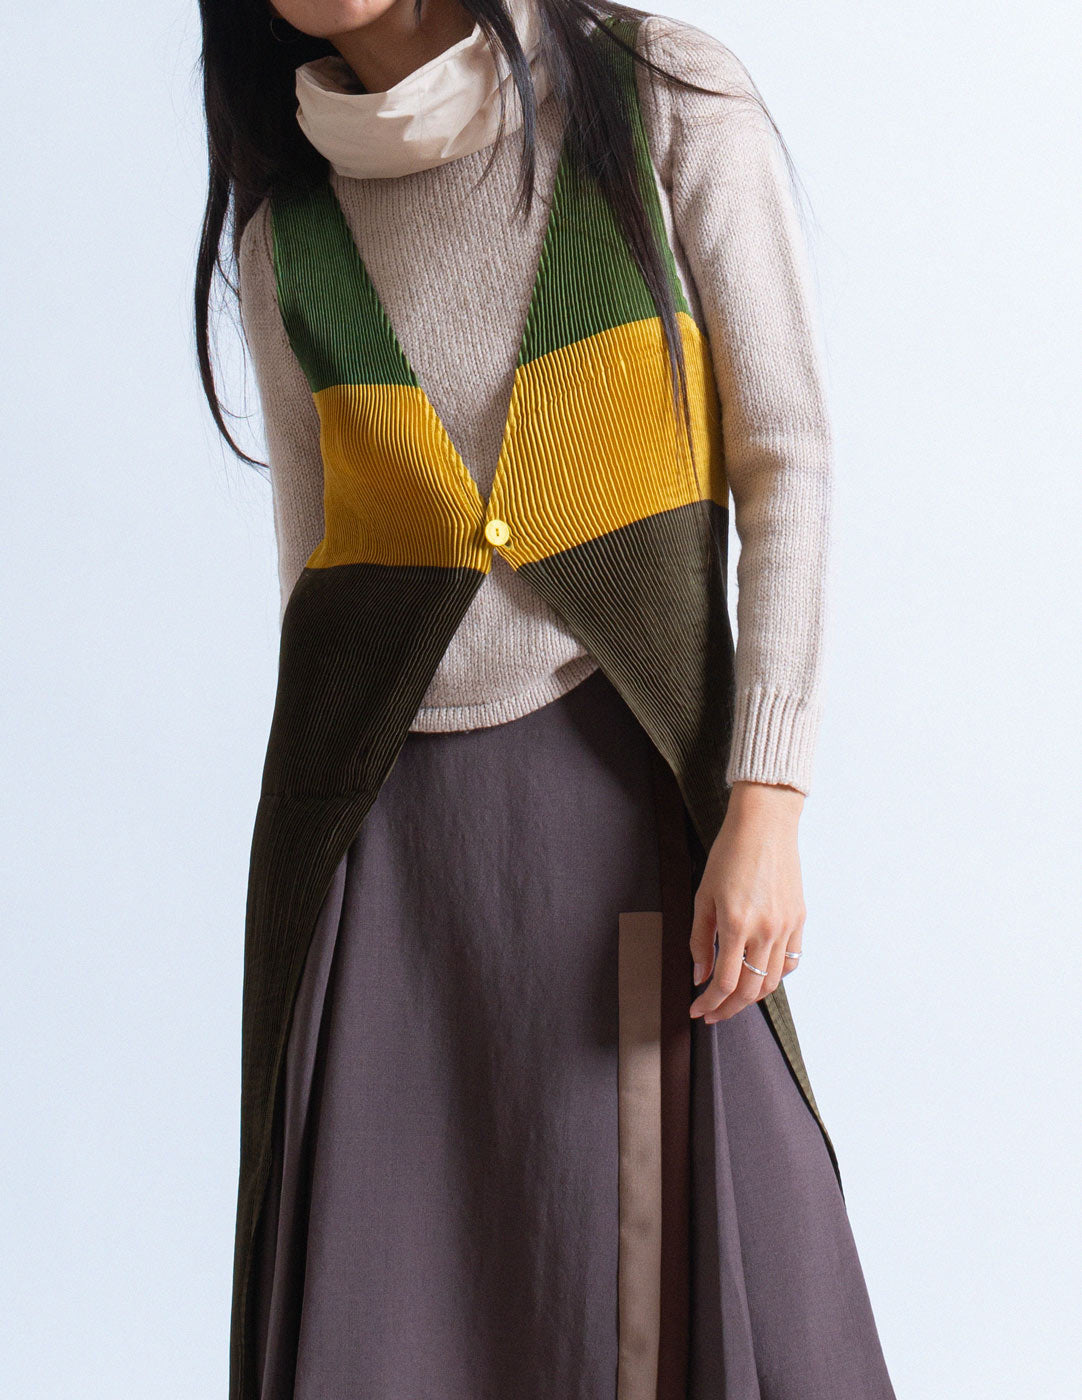 Issey Miyake tri-colored pleated apron dress detail